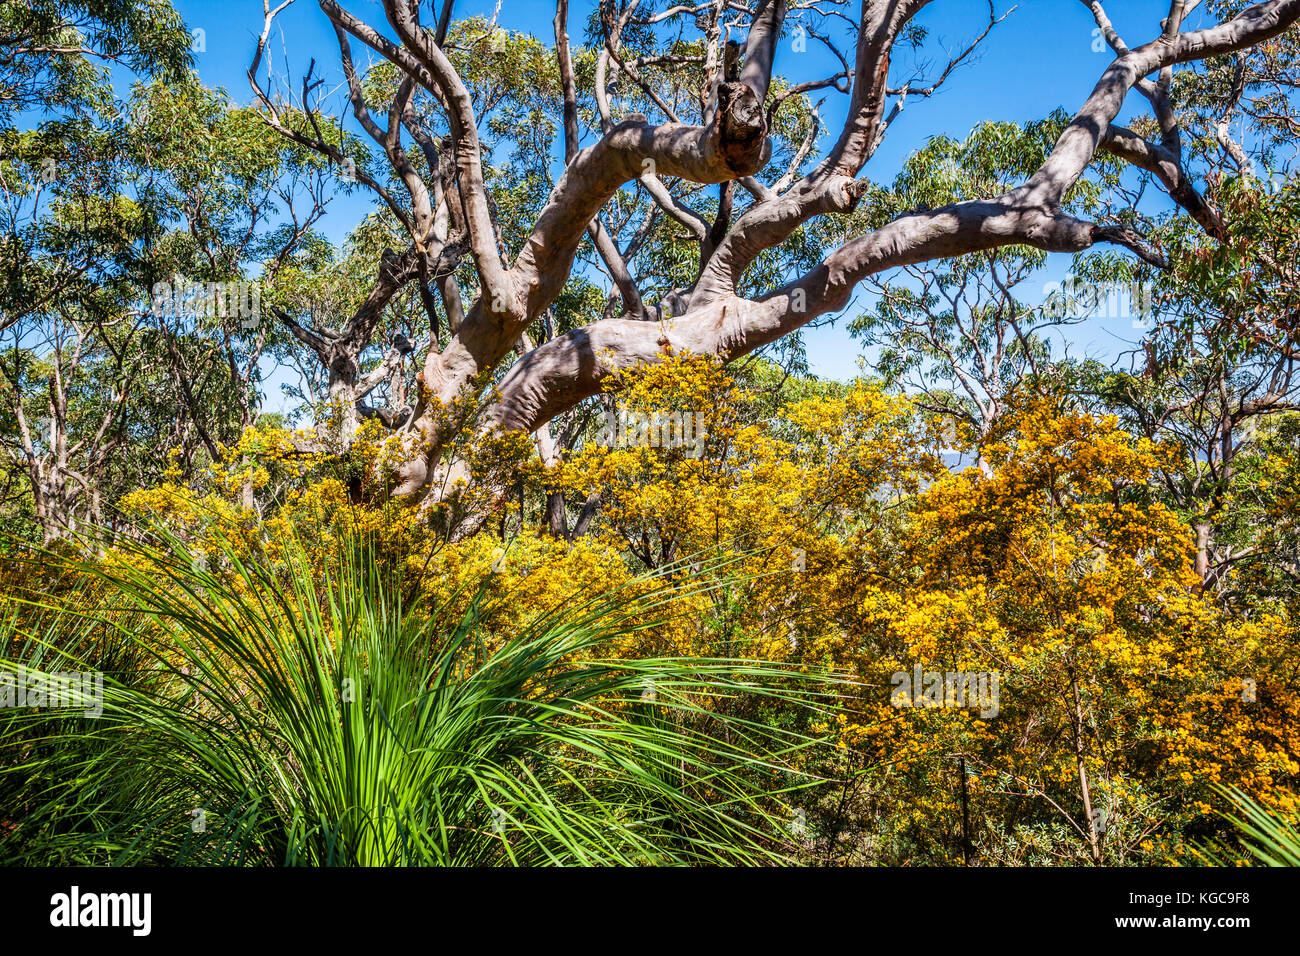 Australia, New South Wales, Central Coast, Bouddi National Park, yellow flowering Graceful Bush Pea grow below a forest of Angophora costata, Sydney R Stock Photo